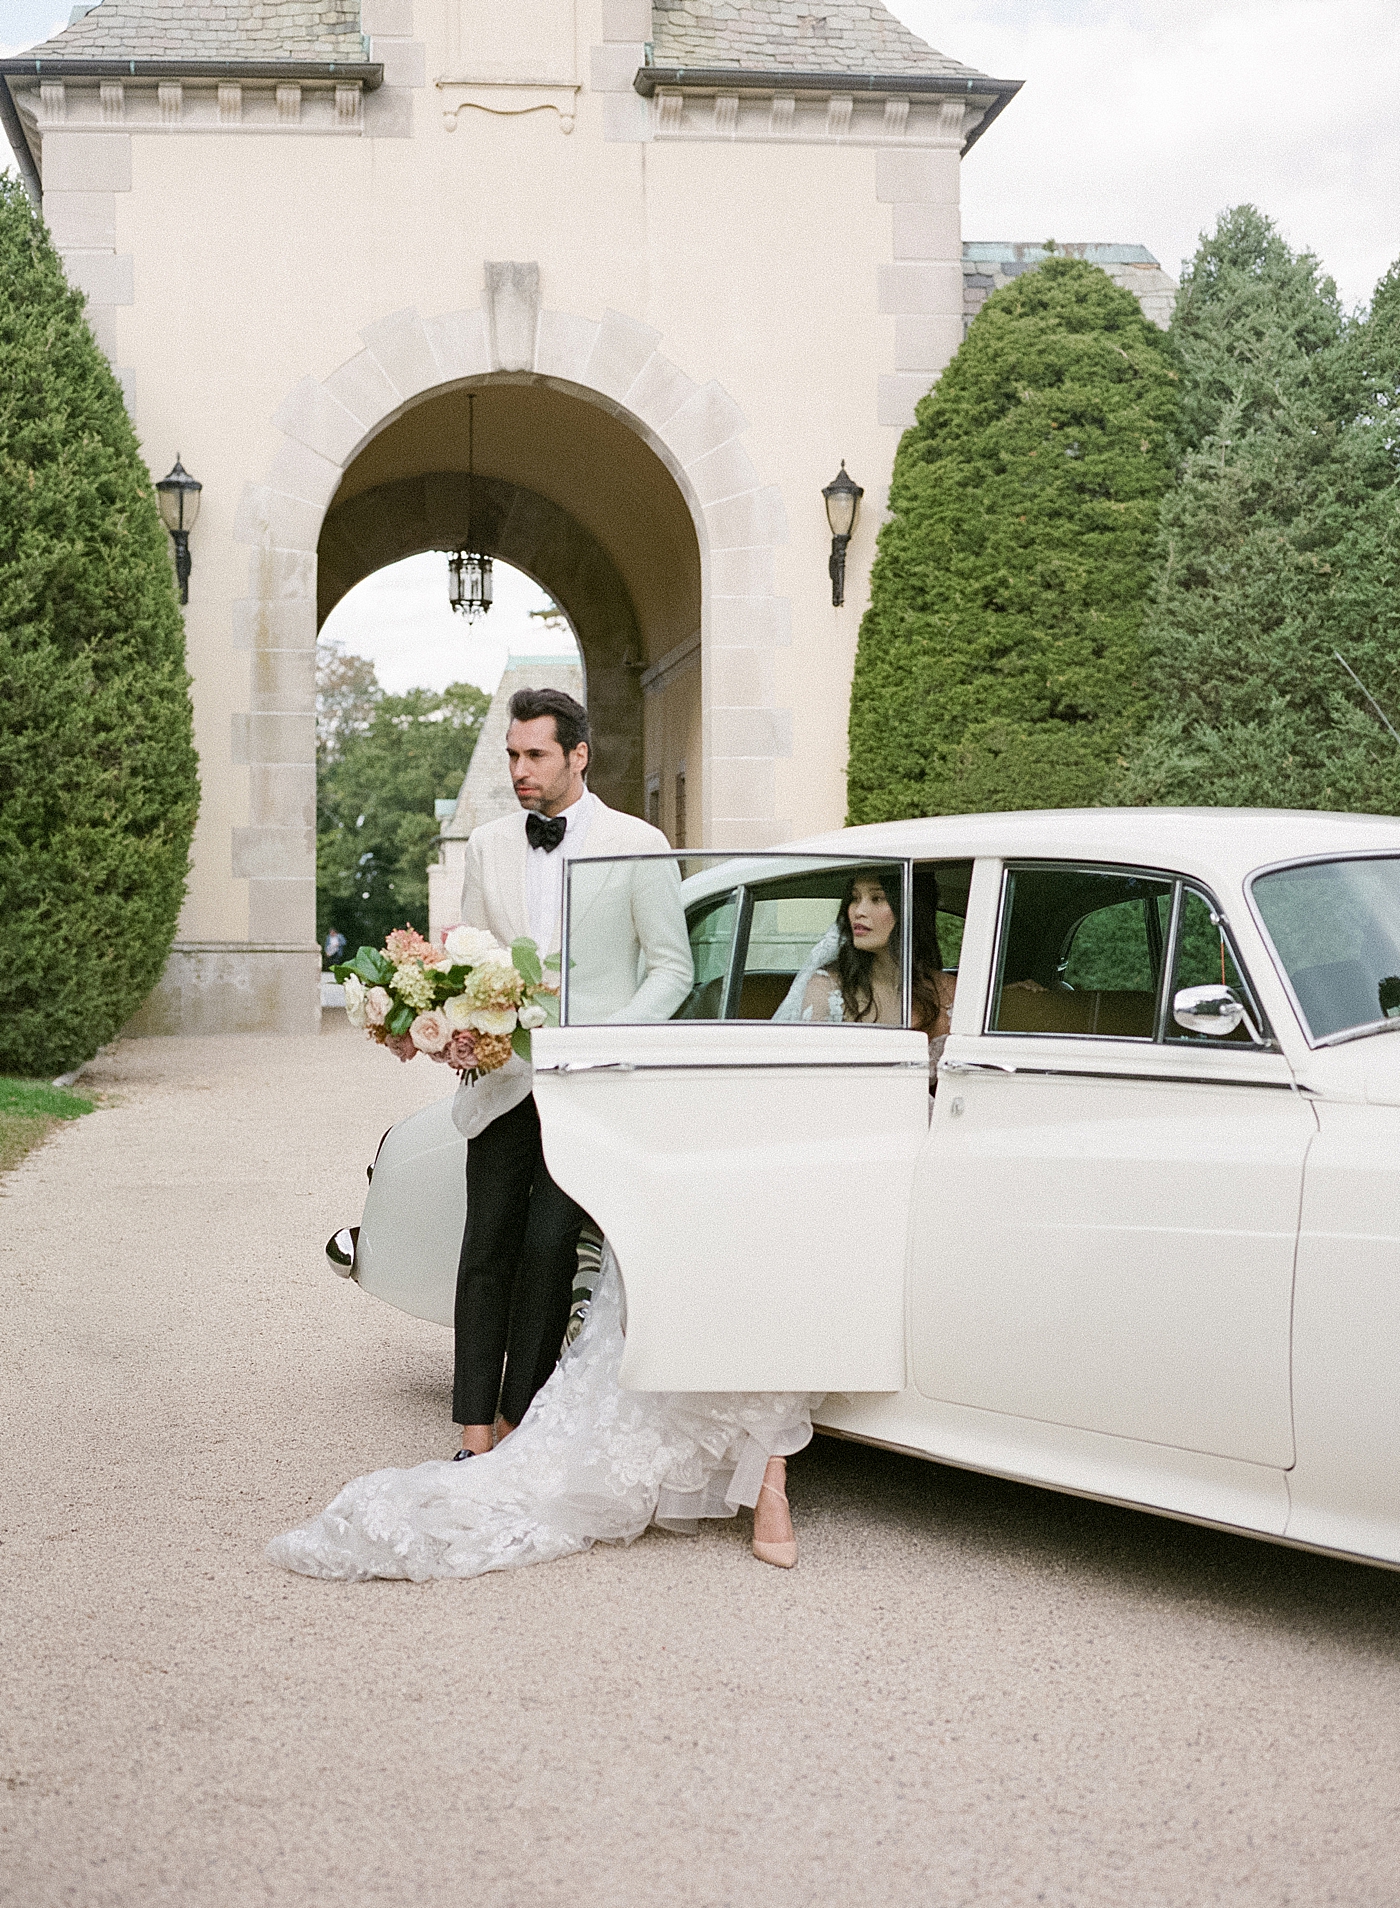 Bride and groom getting into a classic car in a gravel driveway during Oheka castle wedding | Image by Hope Helmuth Photography